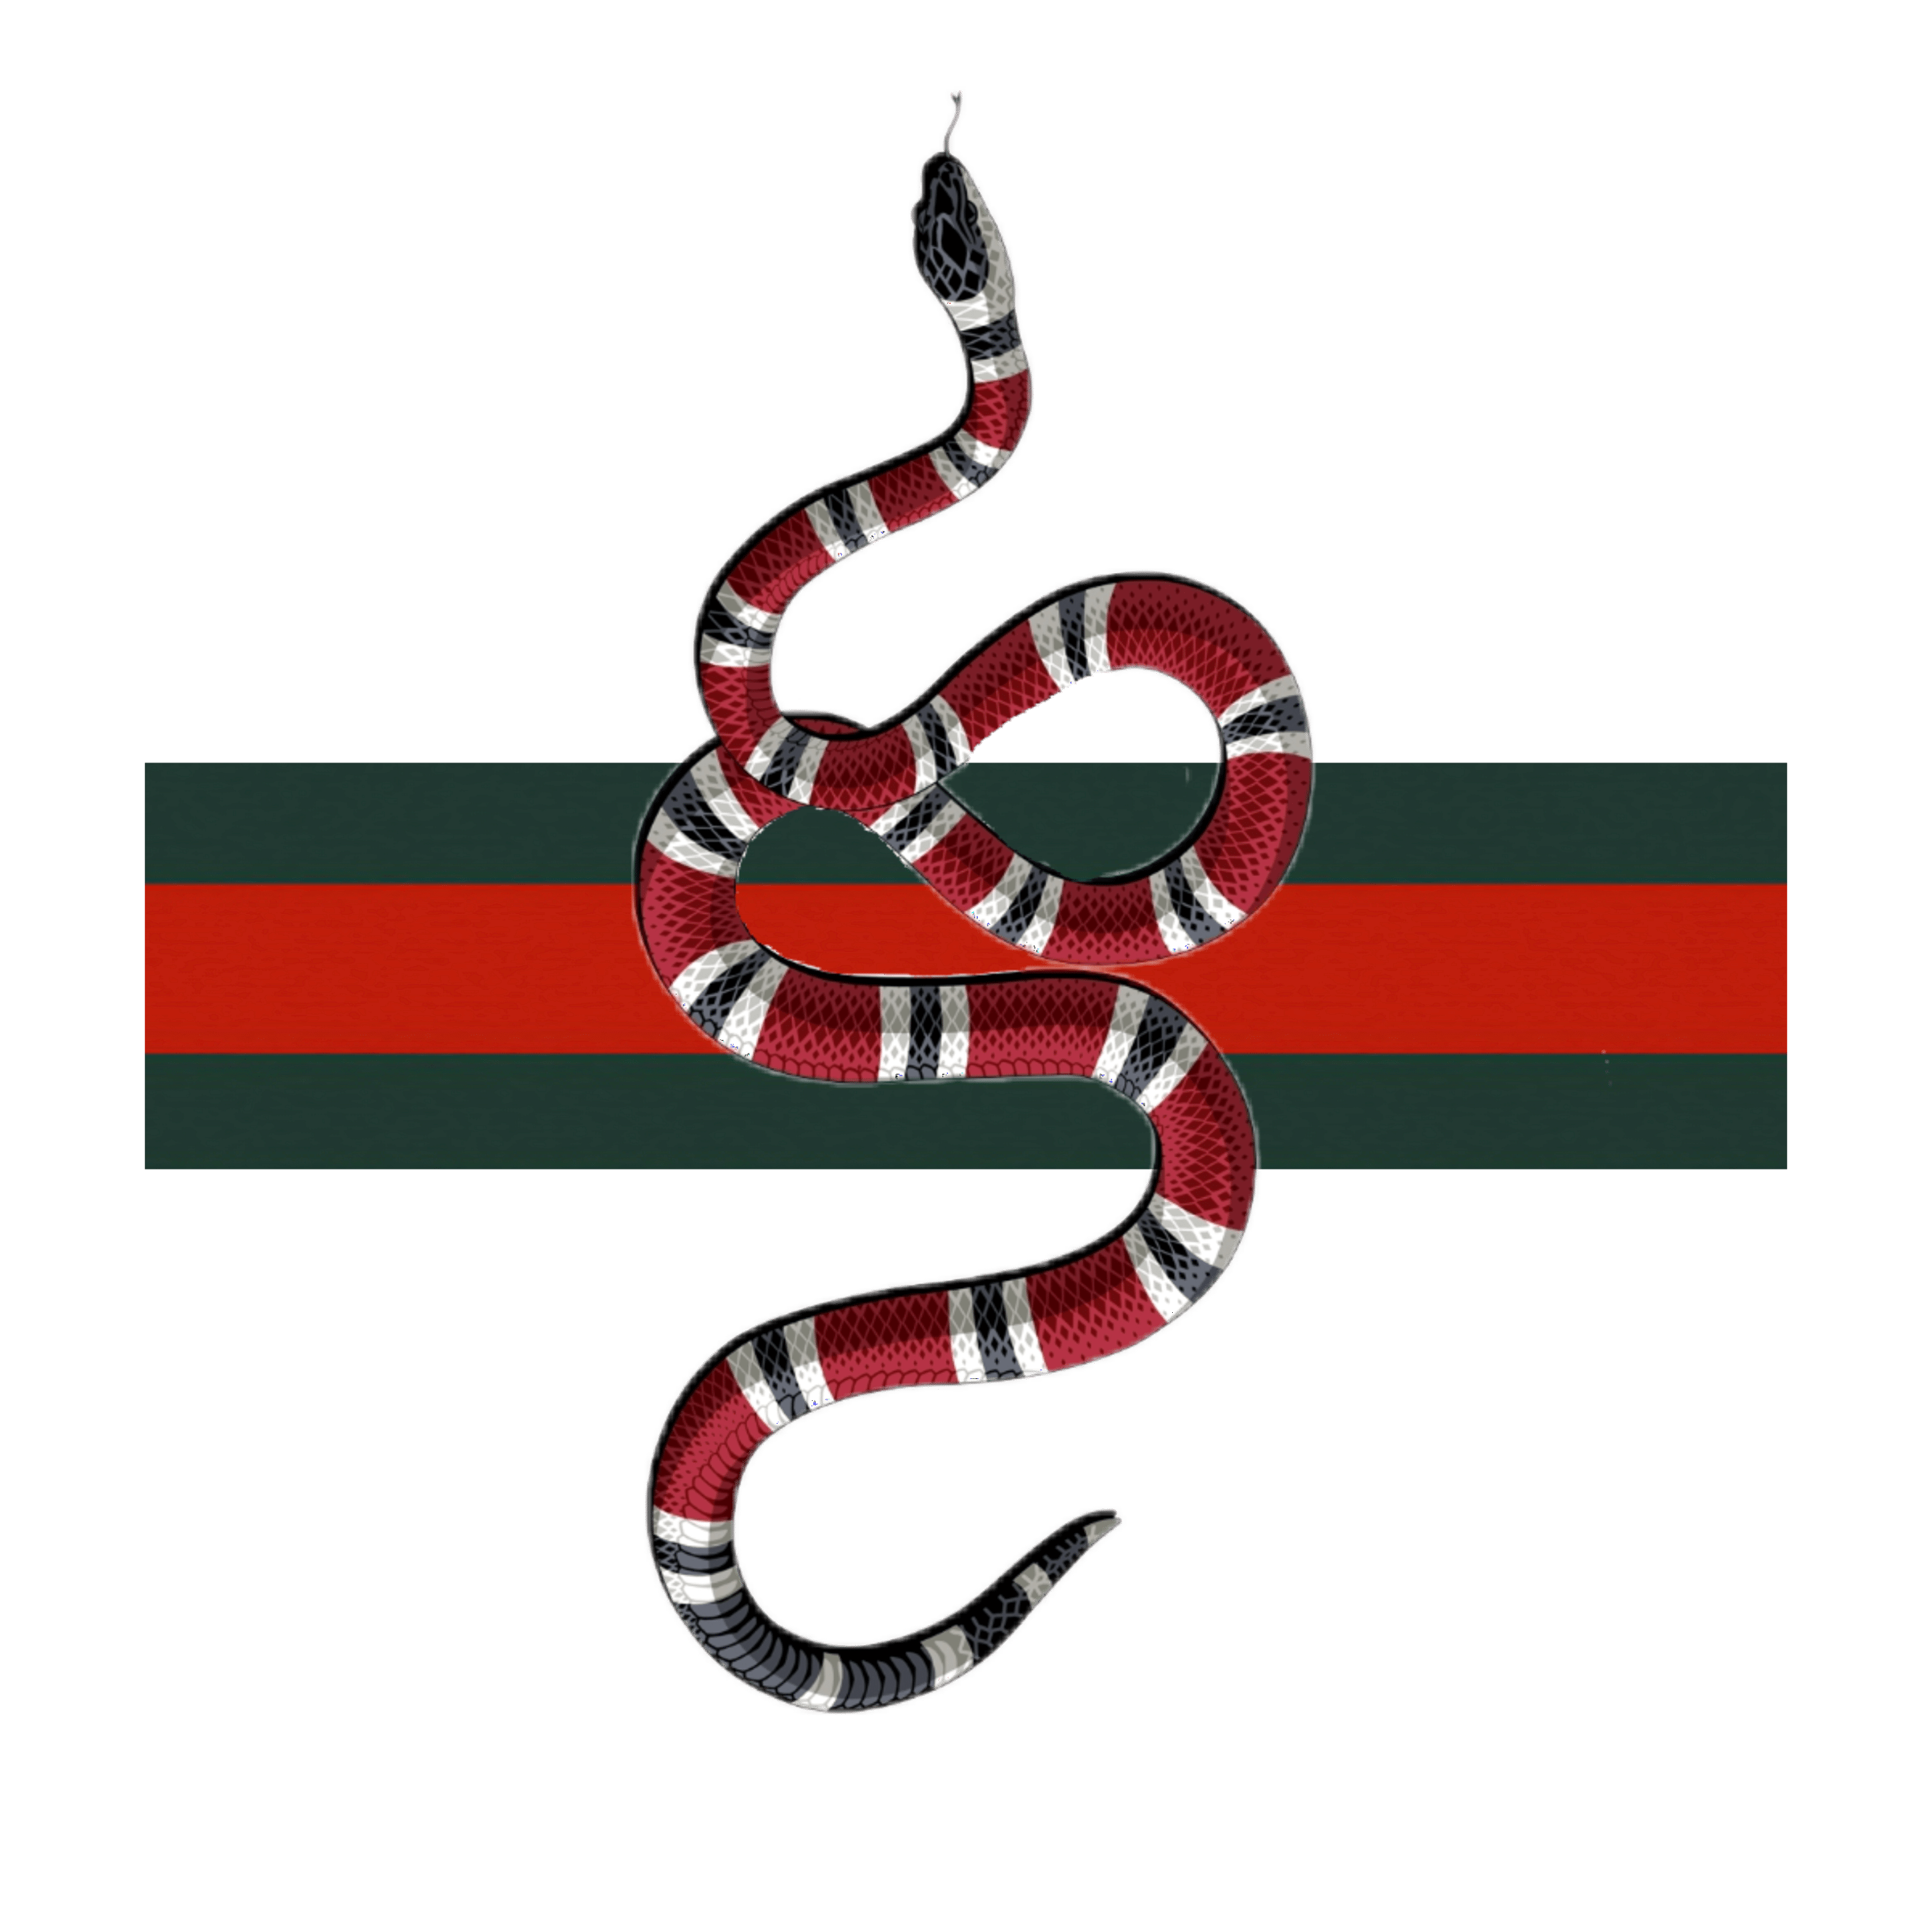 Gucci Snake Logo Wallpapers - Top Free Gucci Snake Logo Backgrounds ...